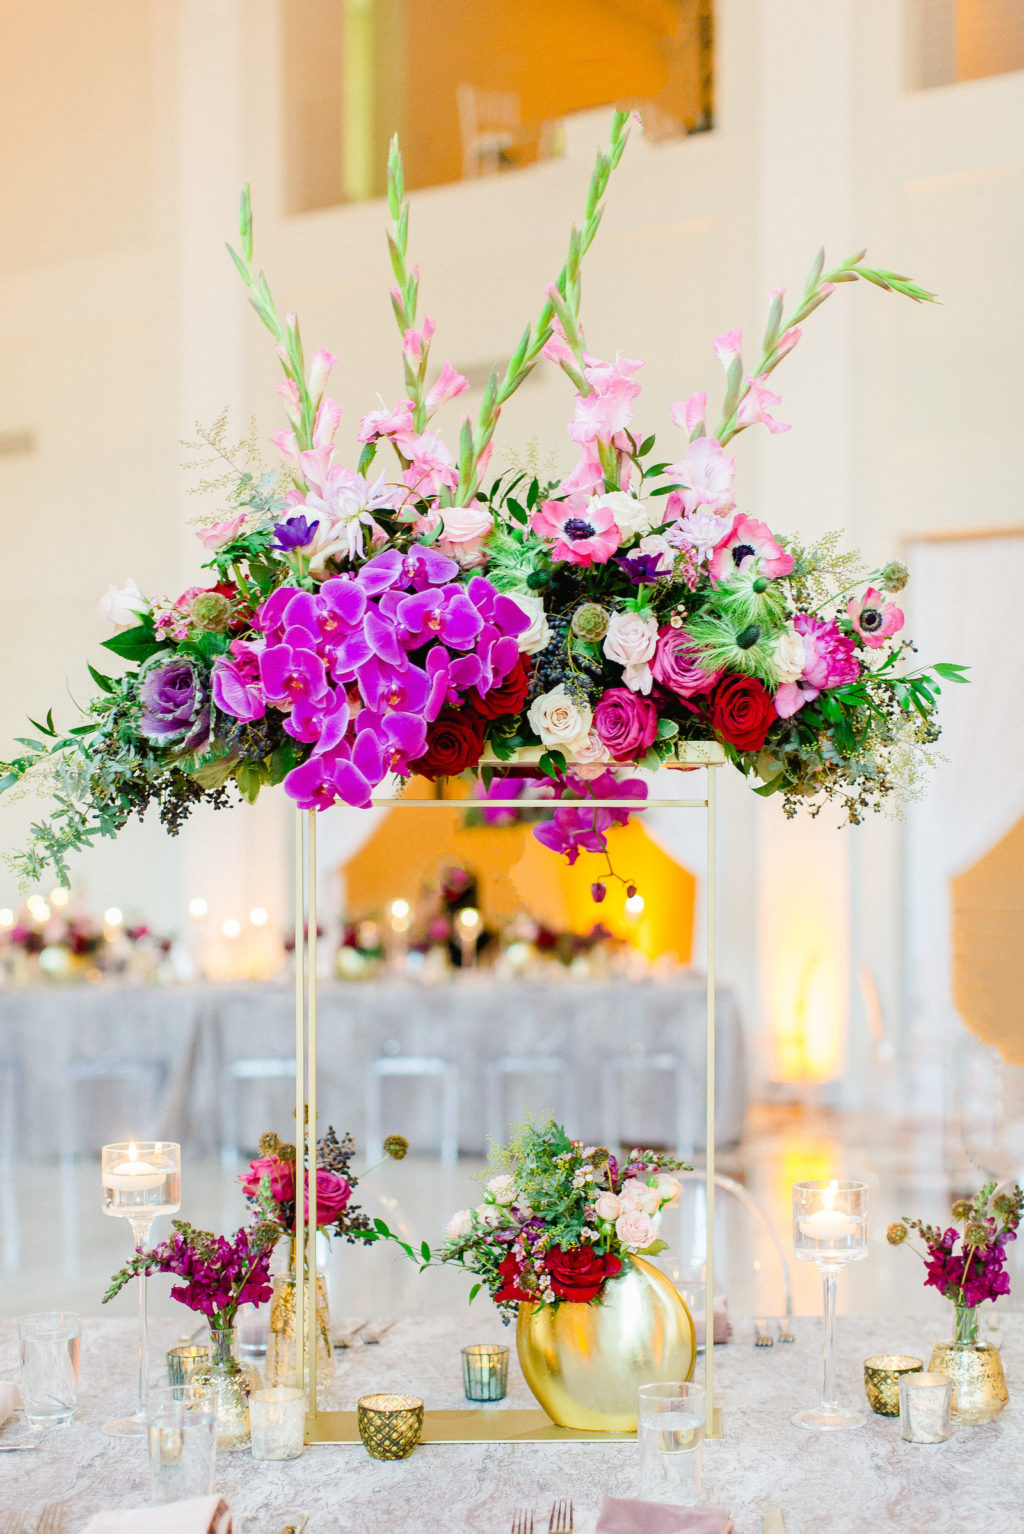 Colorful Luxury Tampa Wedding Centerpieces of Pink Gladiolas, Roses, Anemones, Orchids and Greenery with Gold Bud Vases and Candles